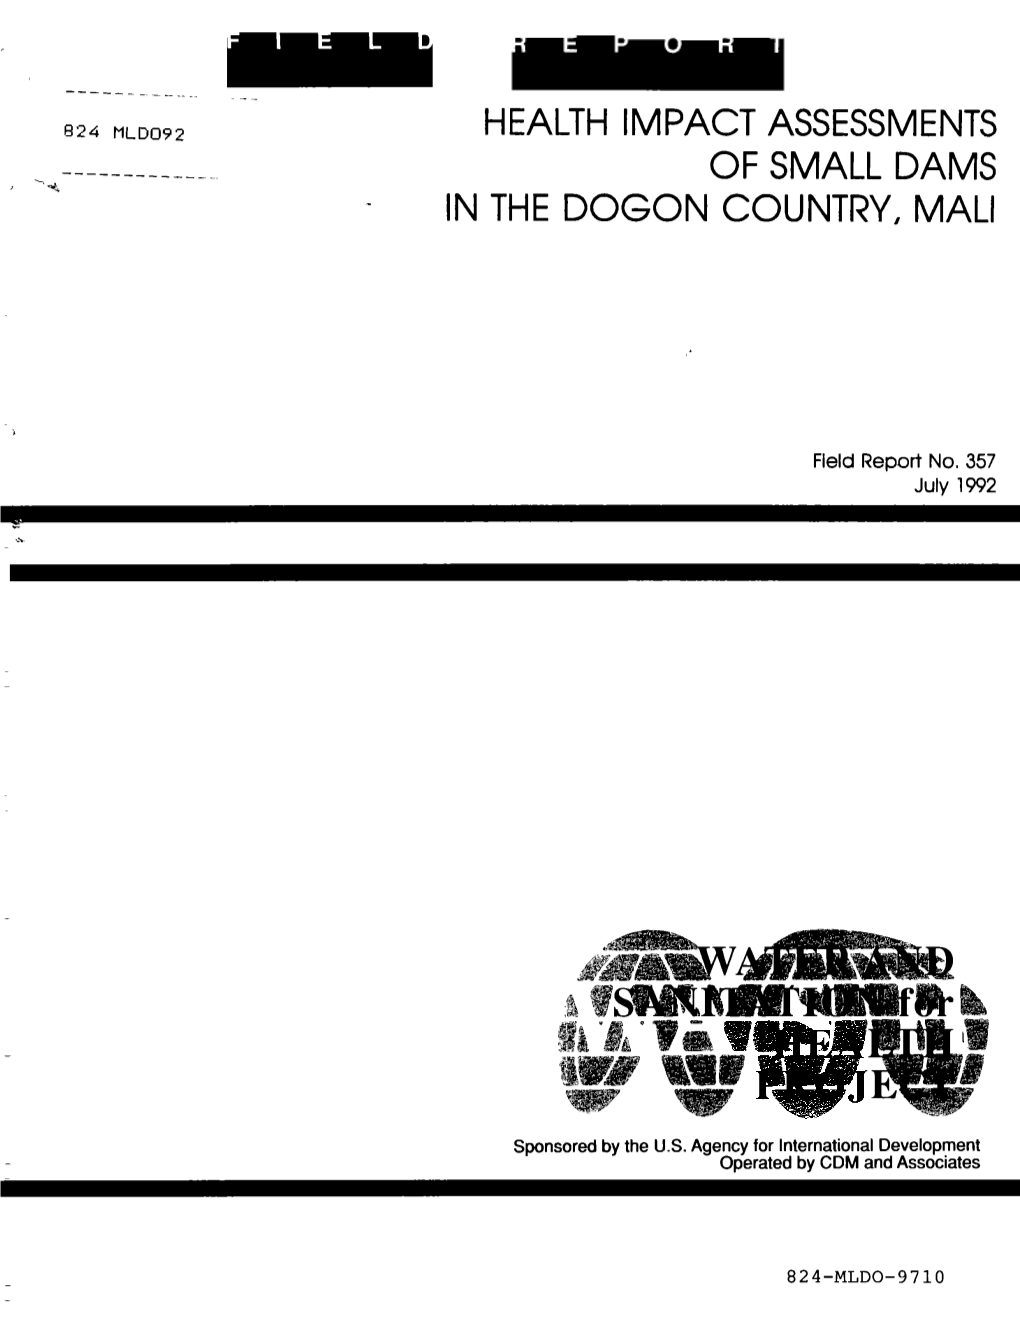 Health Impact Assessments of Small Dams in the Dogon Country, Mali